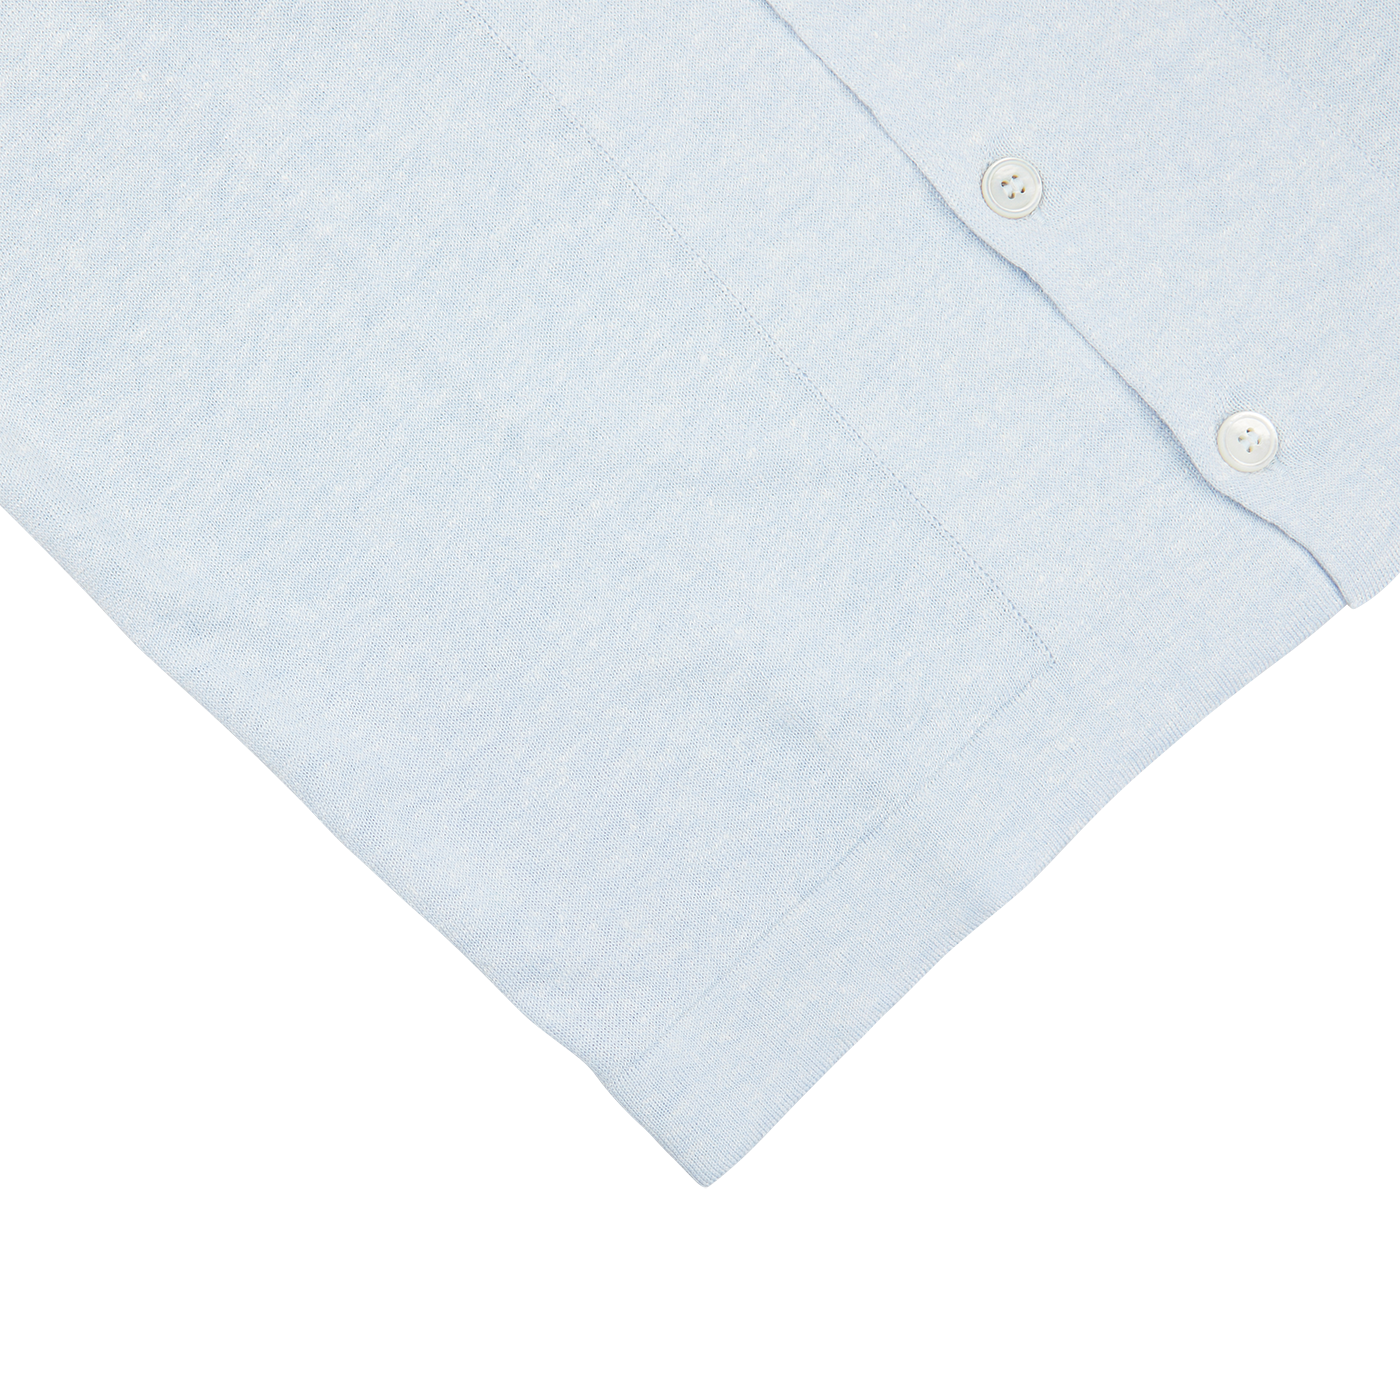 Replace the product in the sentence below with the given product name and brand name.
Sentence: A light blue short sleeve shirt with a button down collar, perfect for your summer wardrobe.
Product Name: Light Blue Linen Cotton Bowling Shirt
Brand Name: Gran Sasso

Revised Sentence: A Gran Sasso Light Blue Linen Cotton Bowling Shirt with a button down collar, perfect for your summer wardrobe.